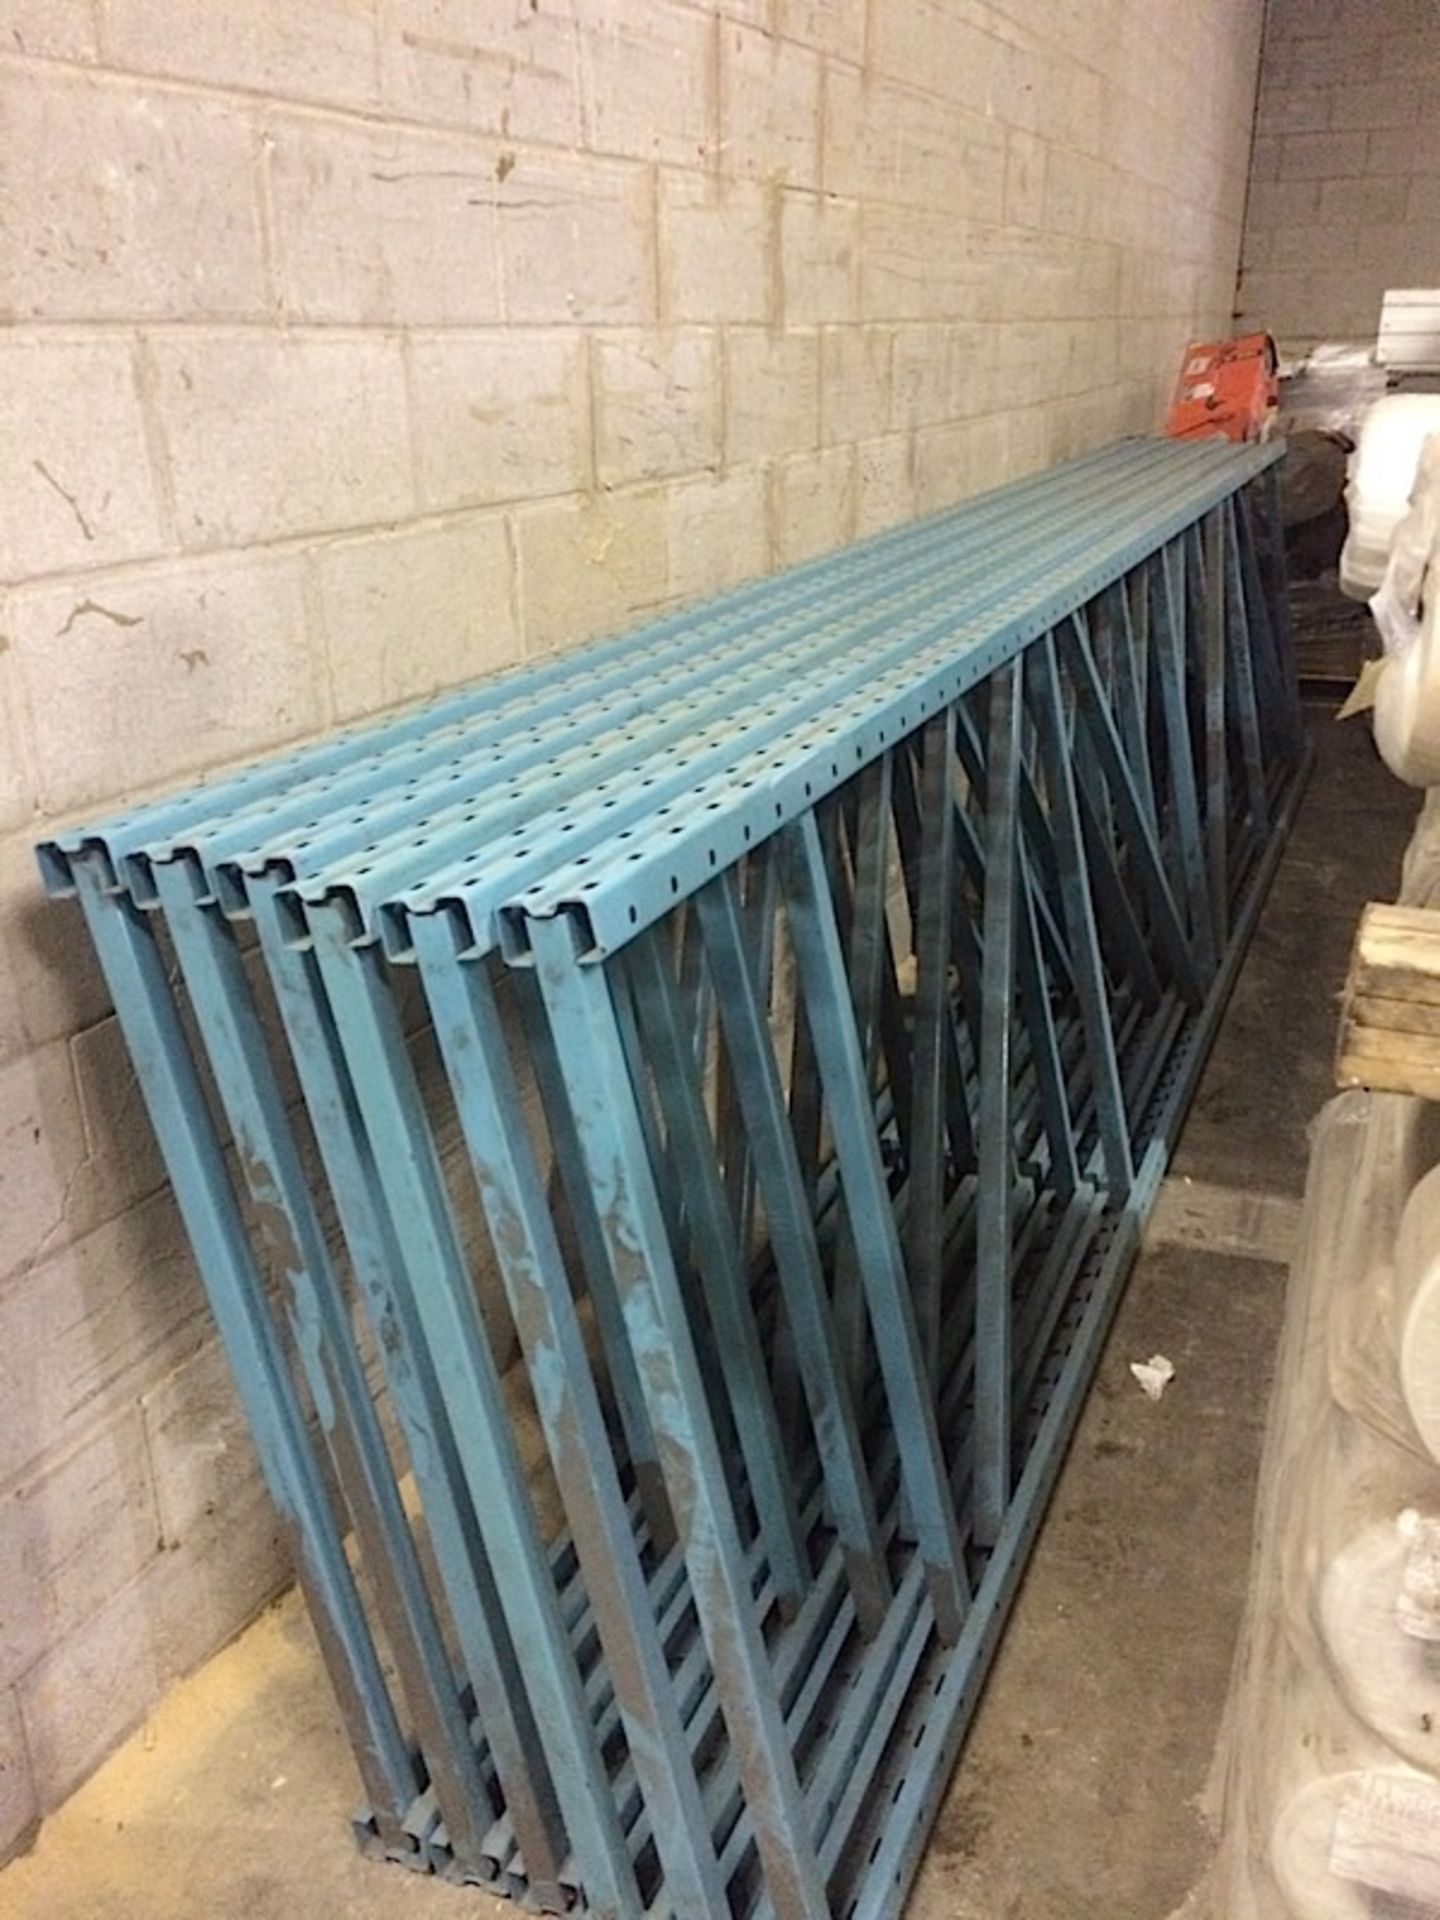 WAREHOUSE RACKING 16ft LONG x 42" WIDE (BIDDING IS PER SECTION OF RACKING MULTIPLIED BY 6)